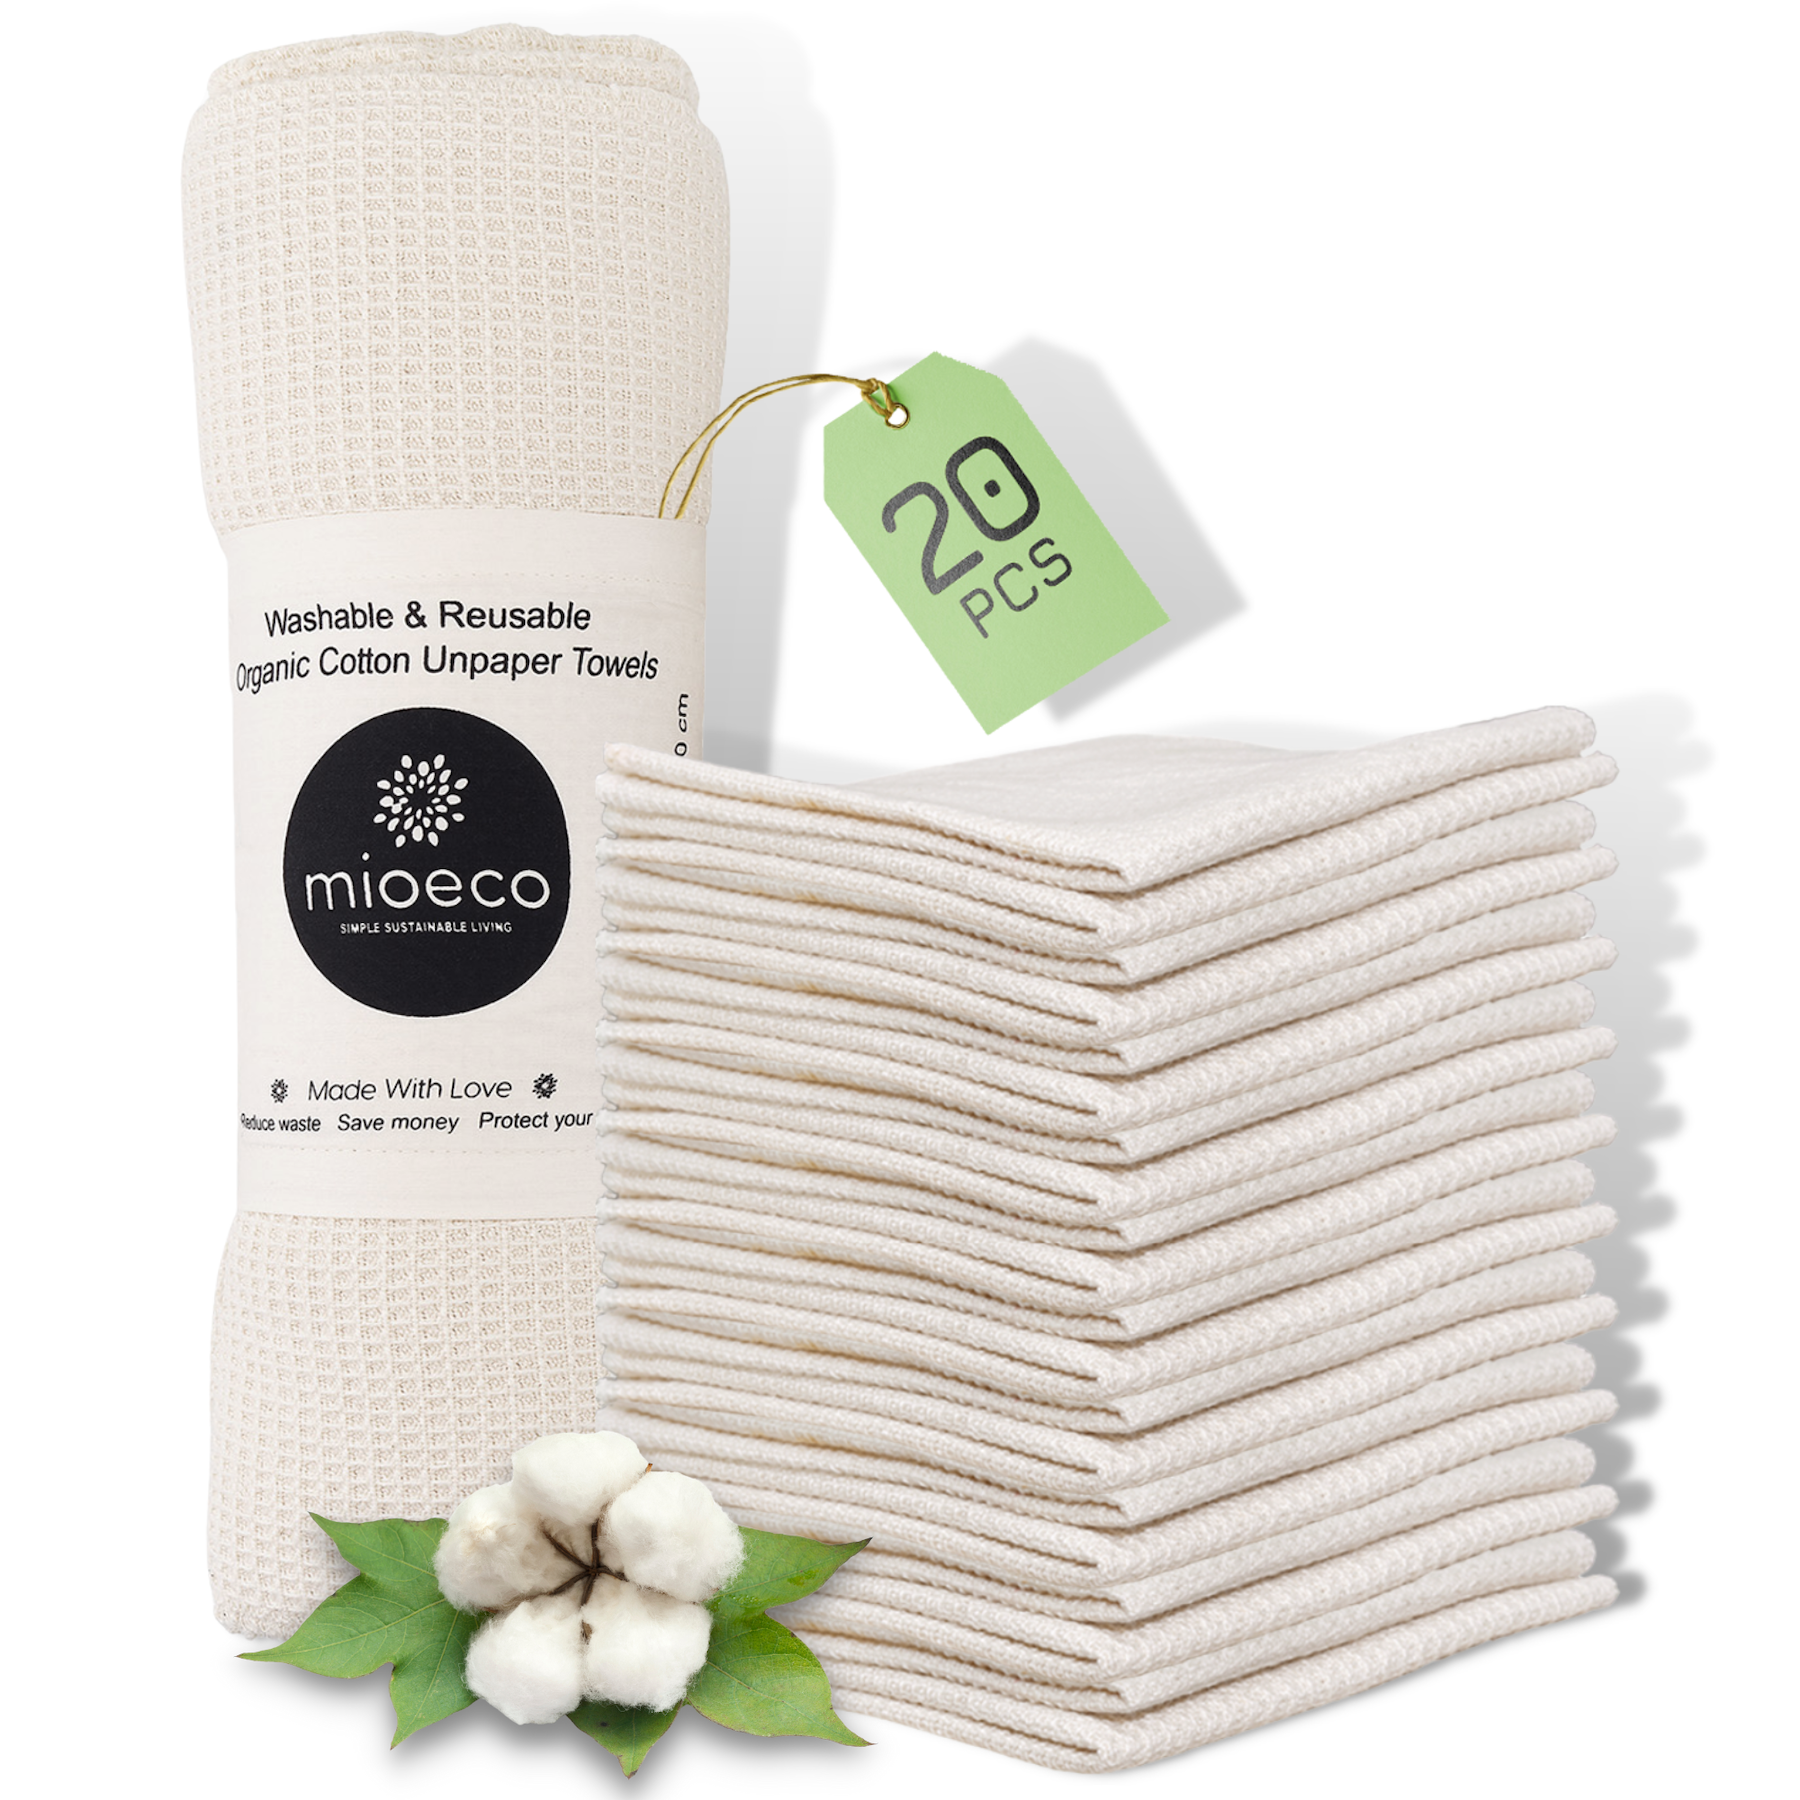 Mioeco Reusable paper towel pack of 20